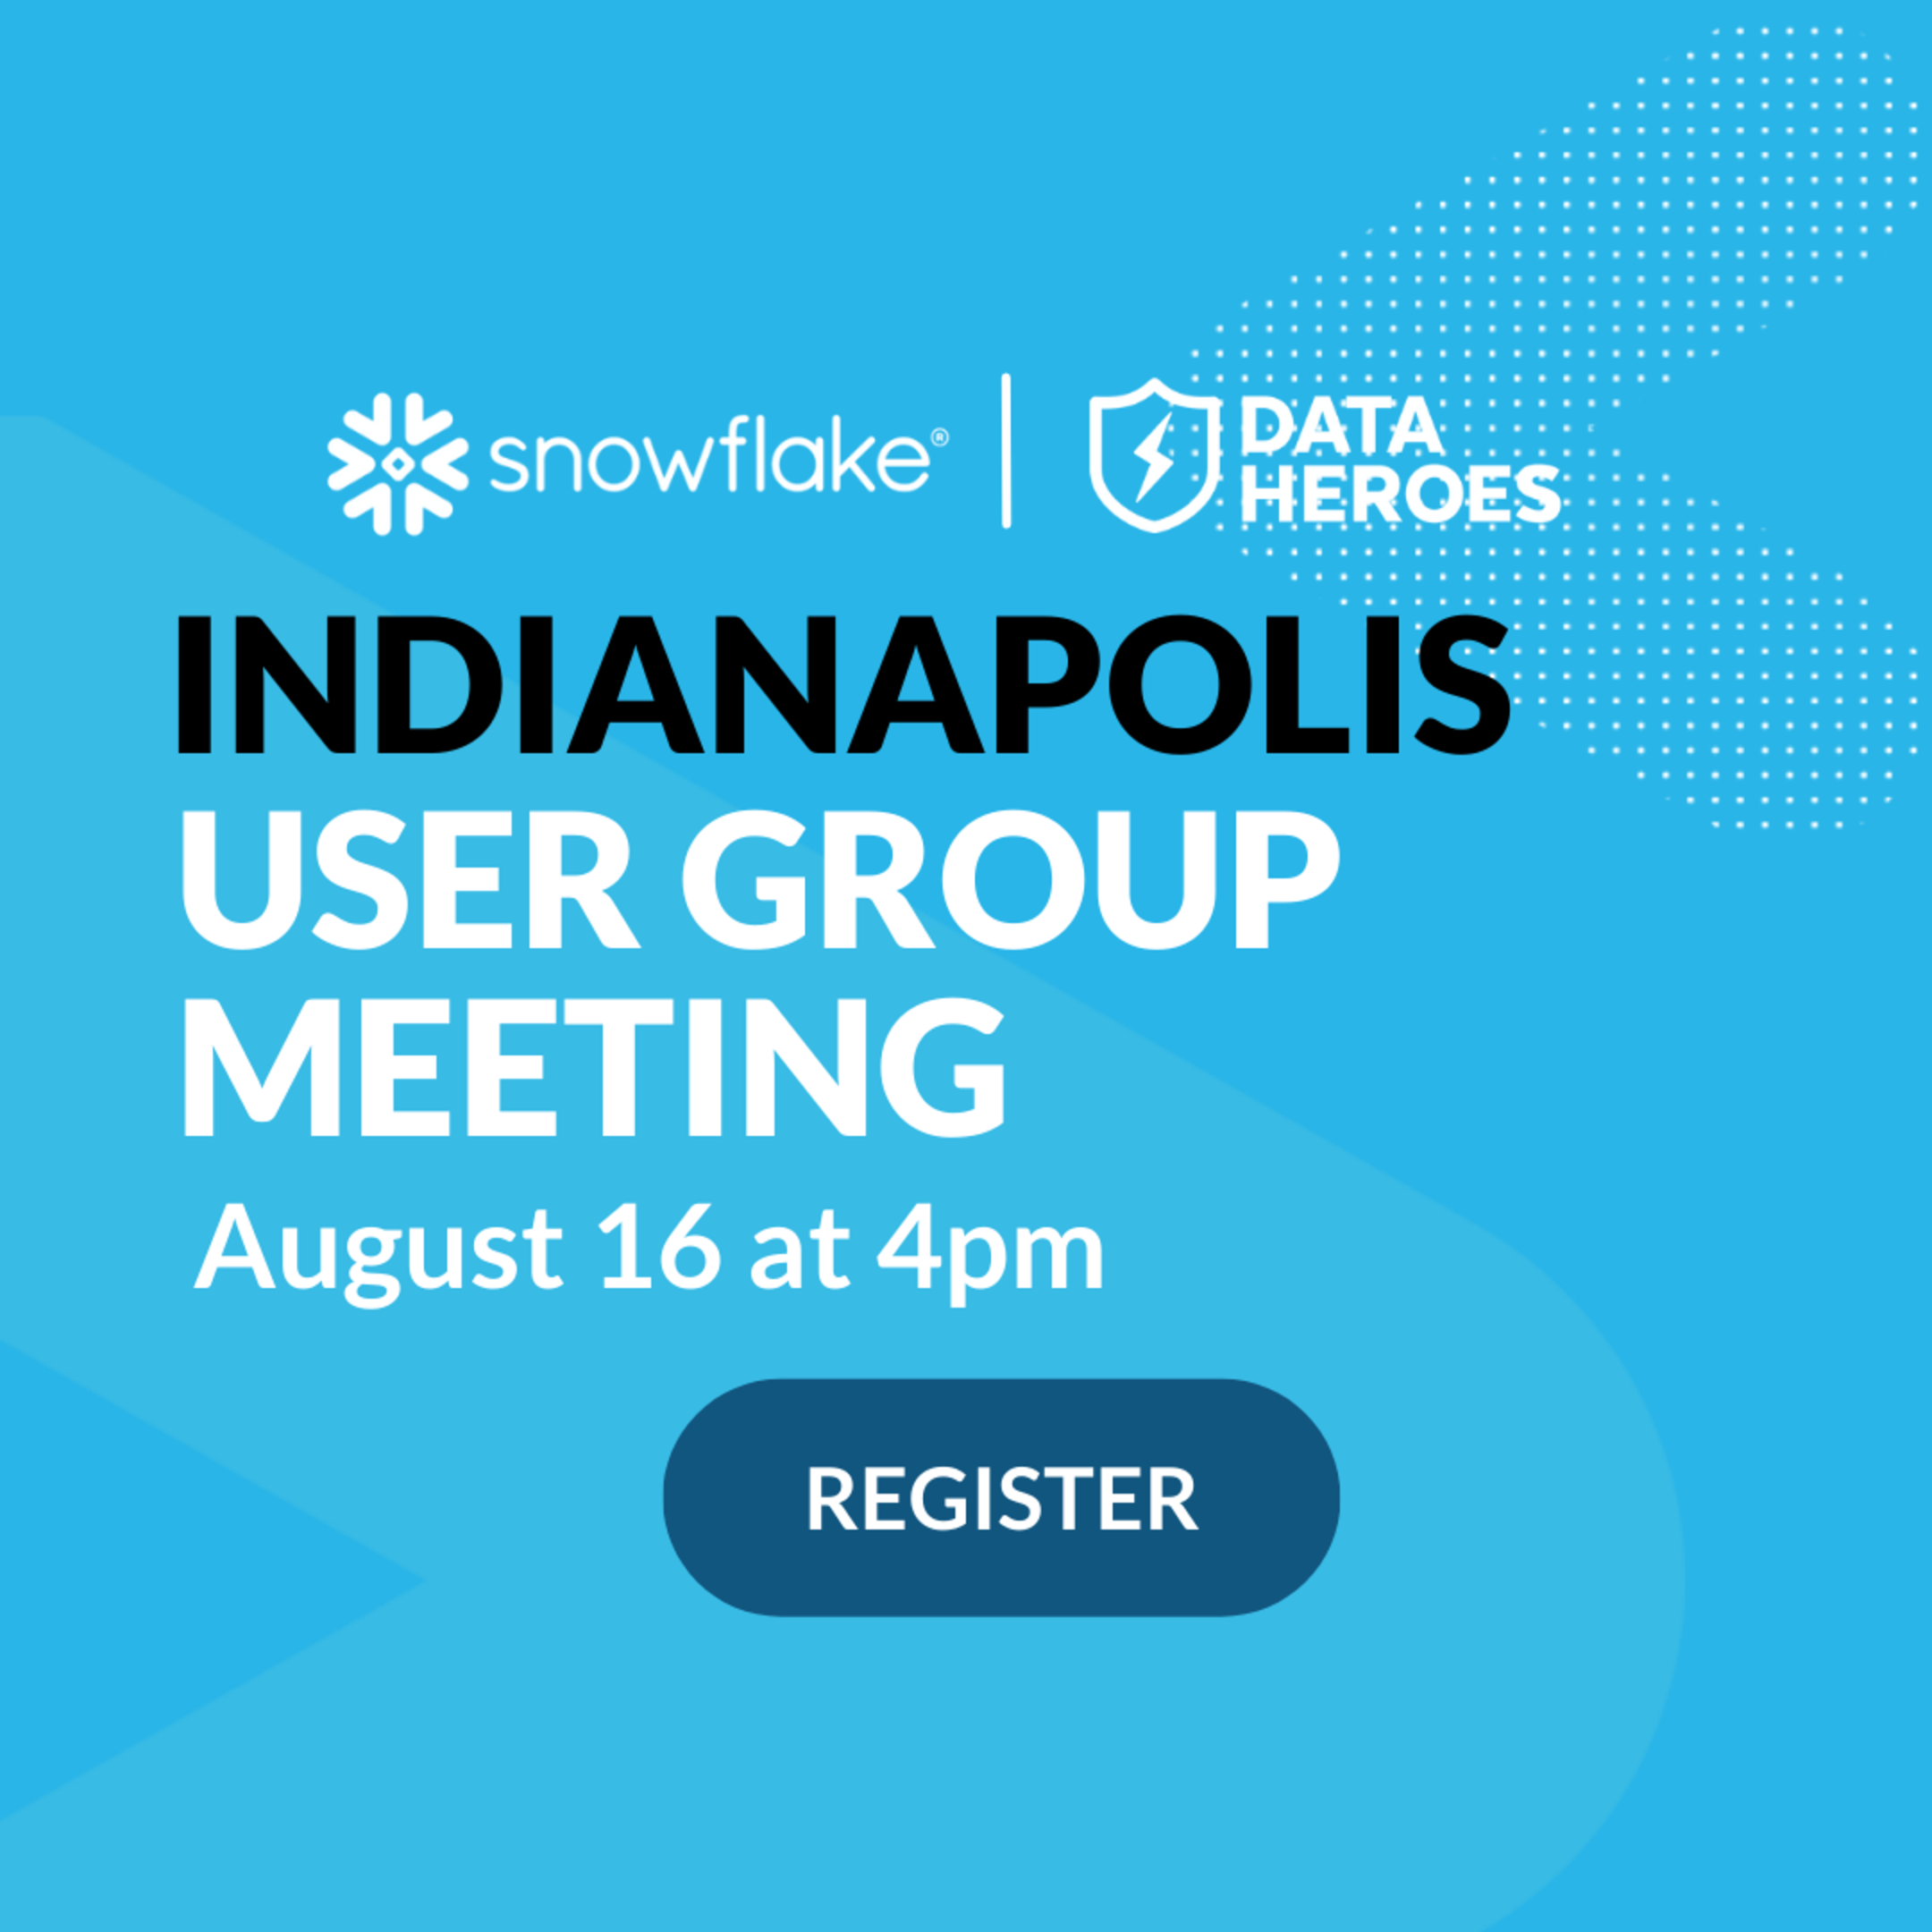 See Indianapolis Snowflake User Group Summit Announcements at